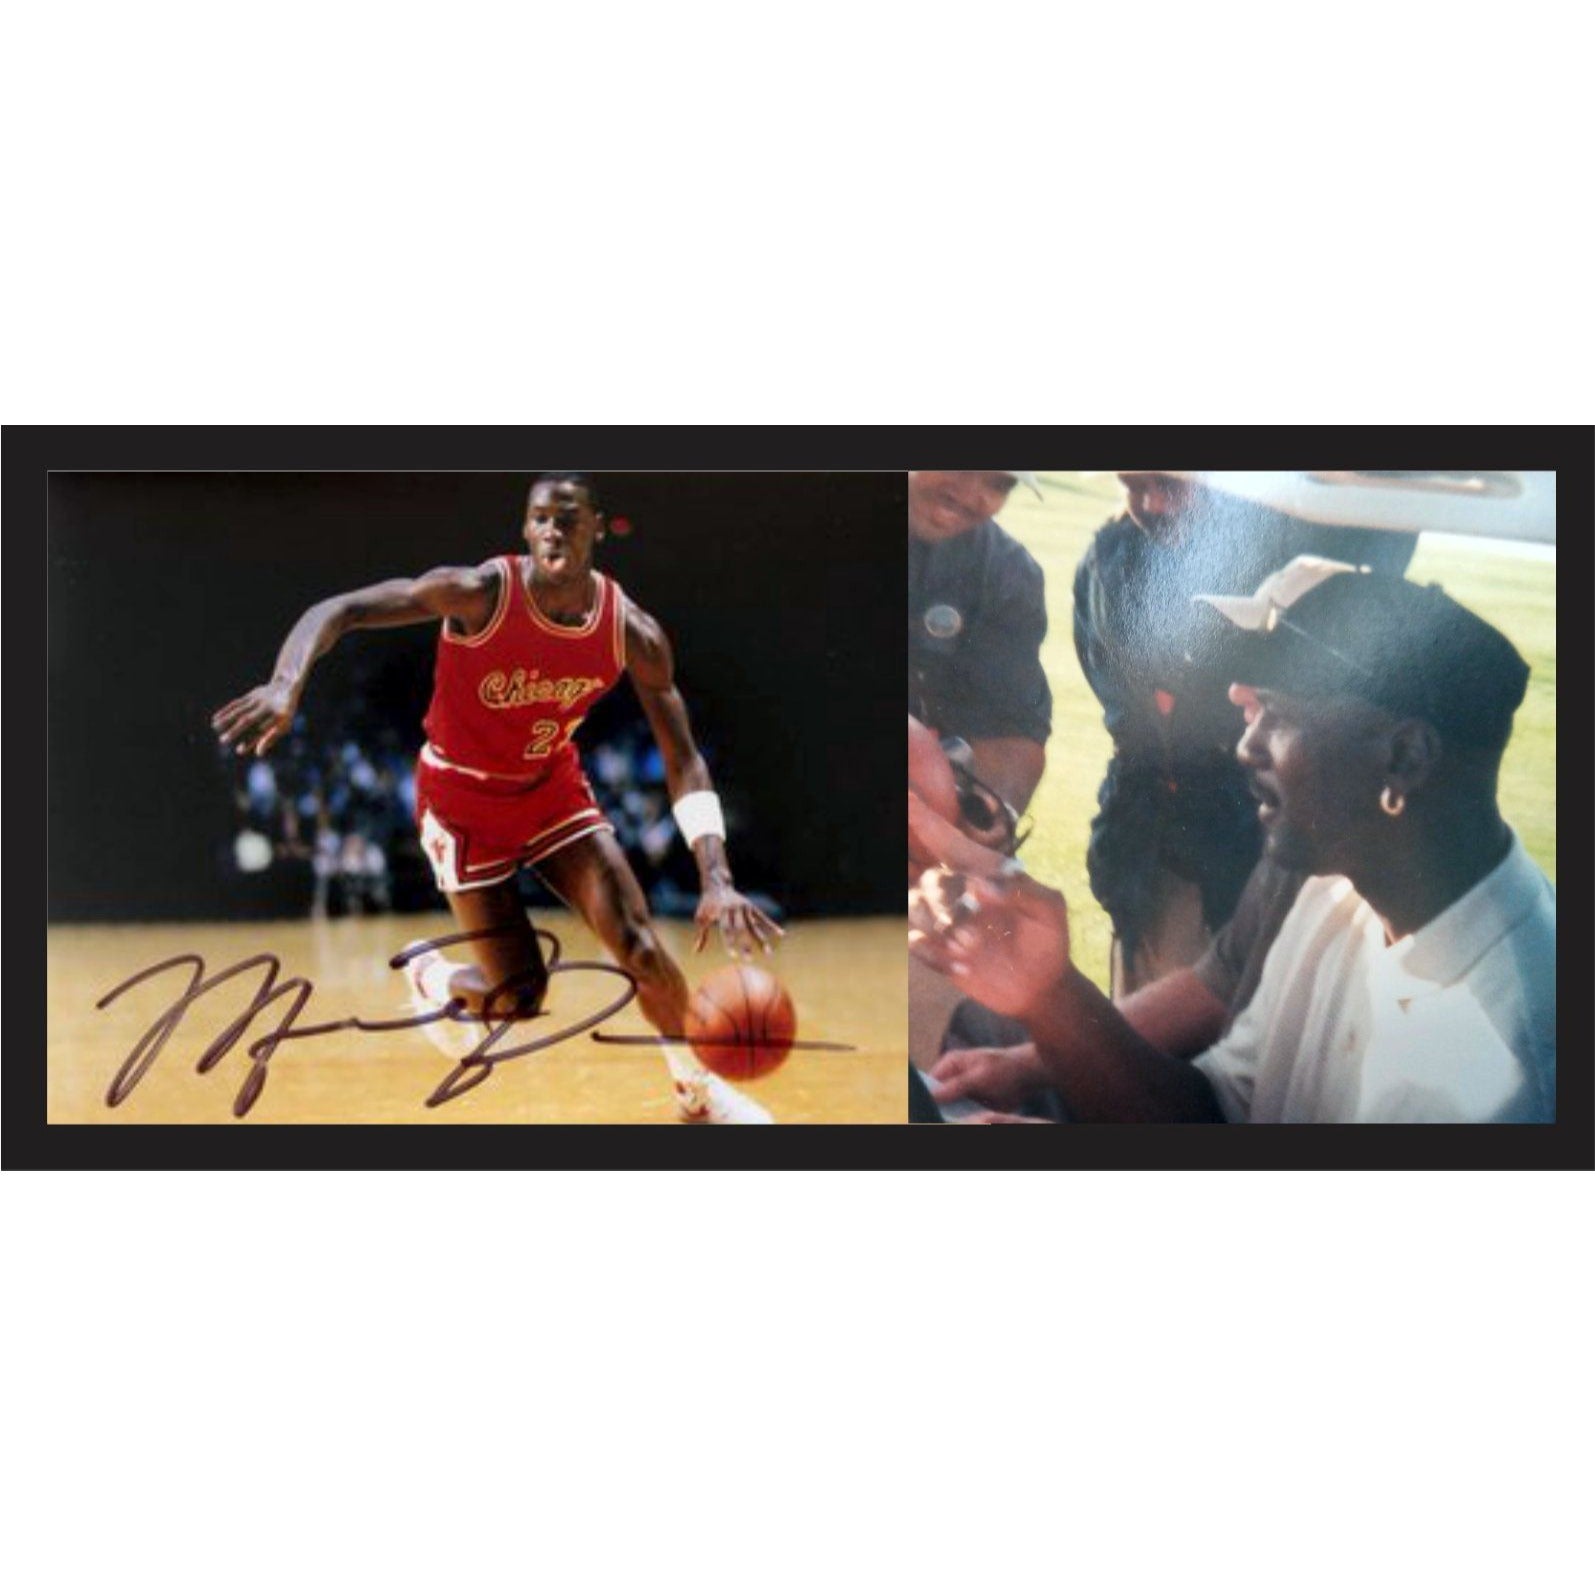 Michael Jordan 5x7 photo signed with proof